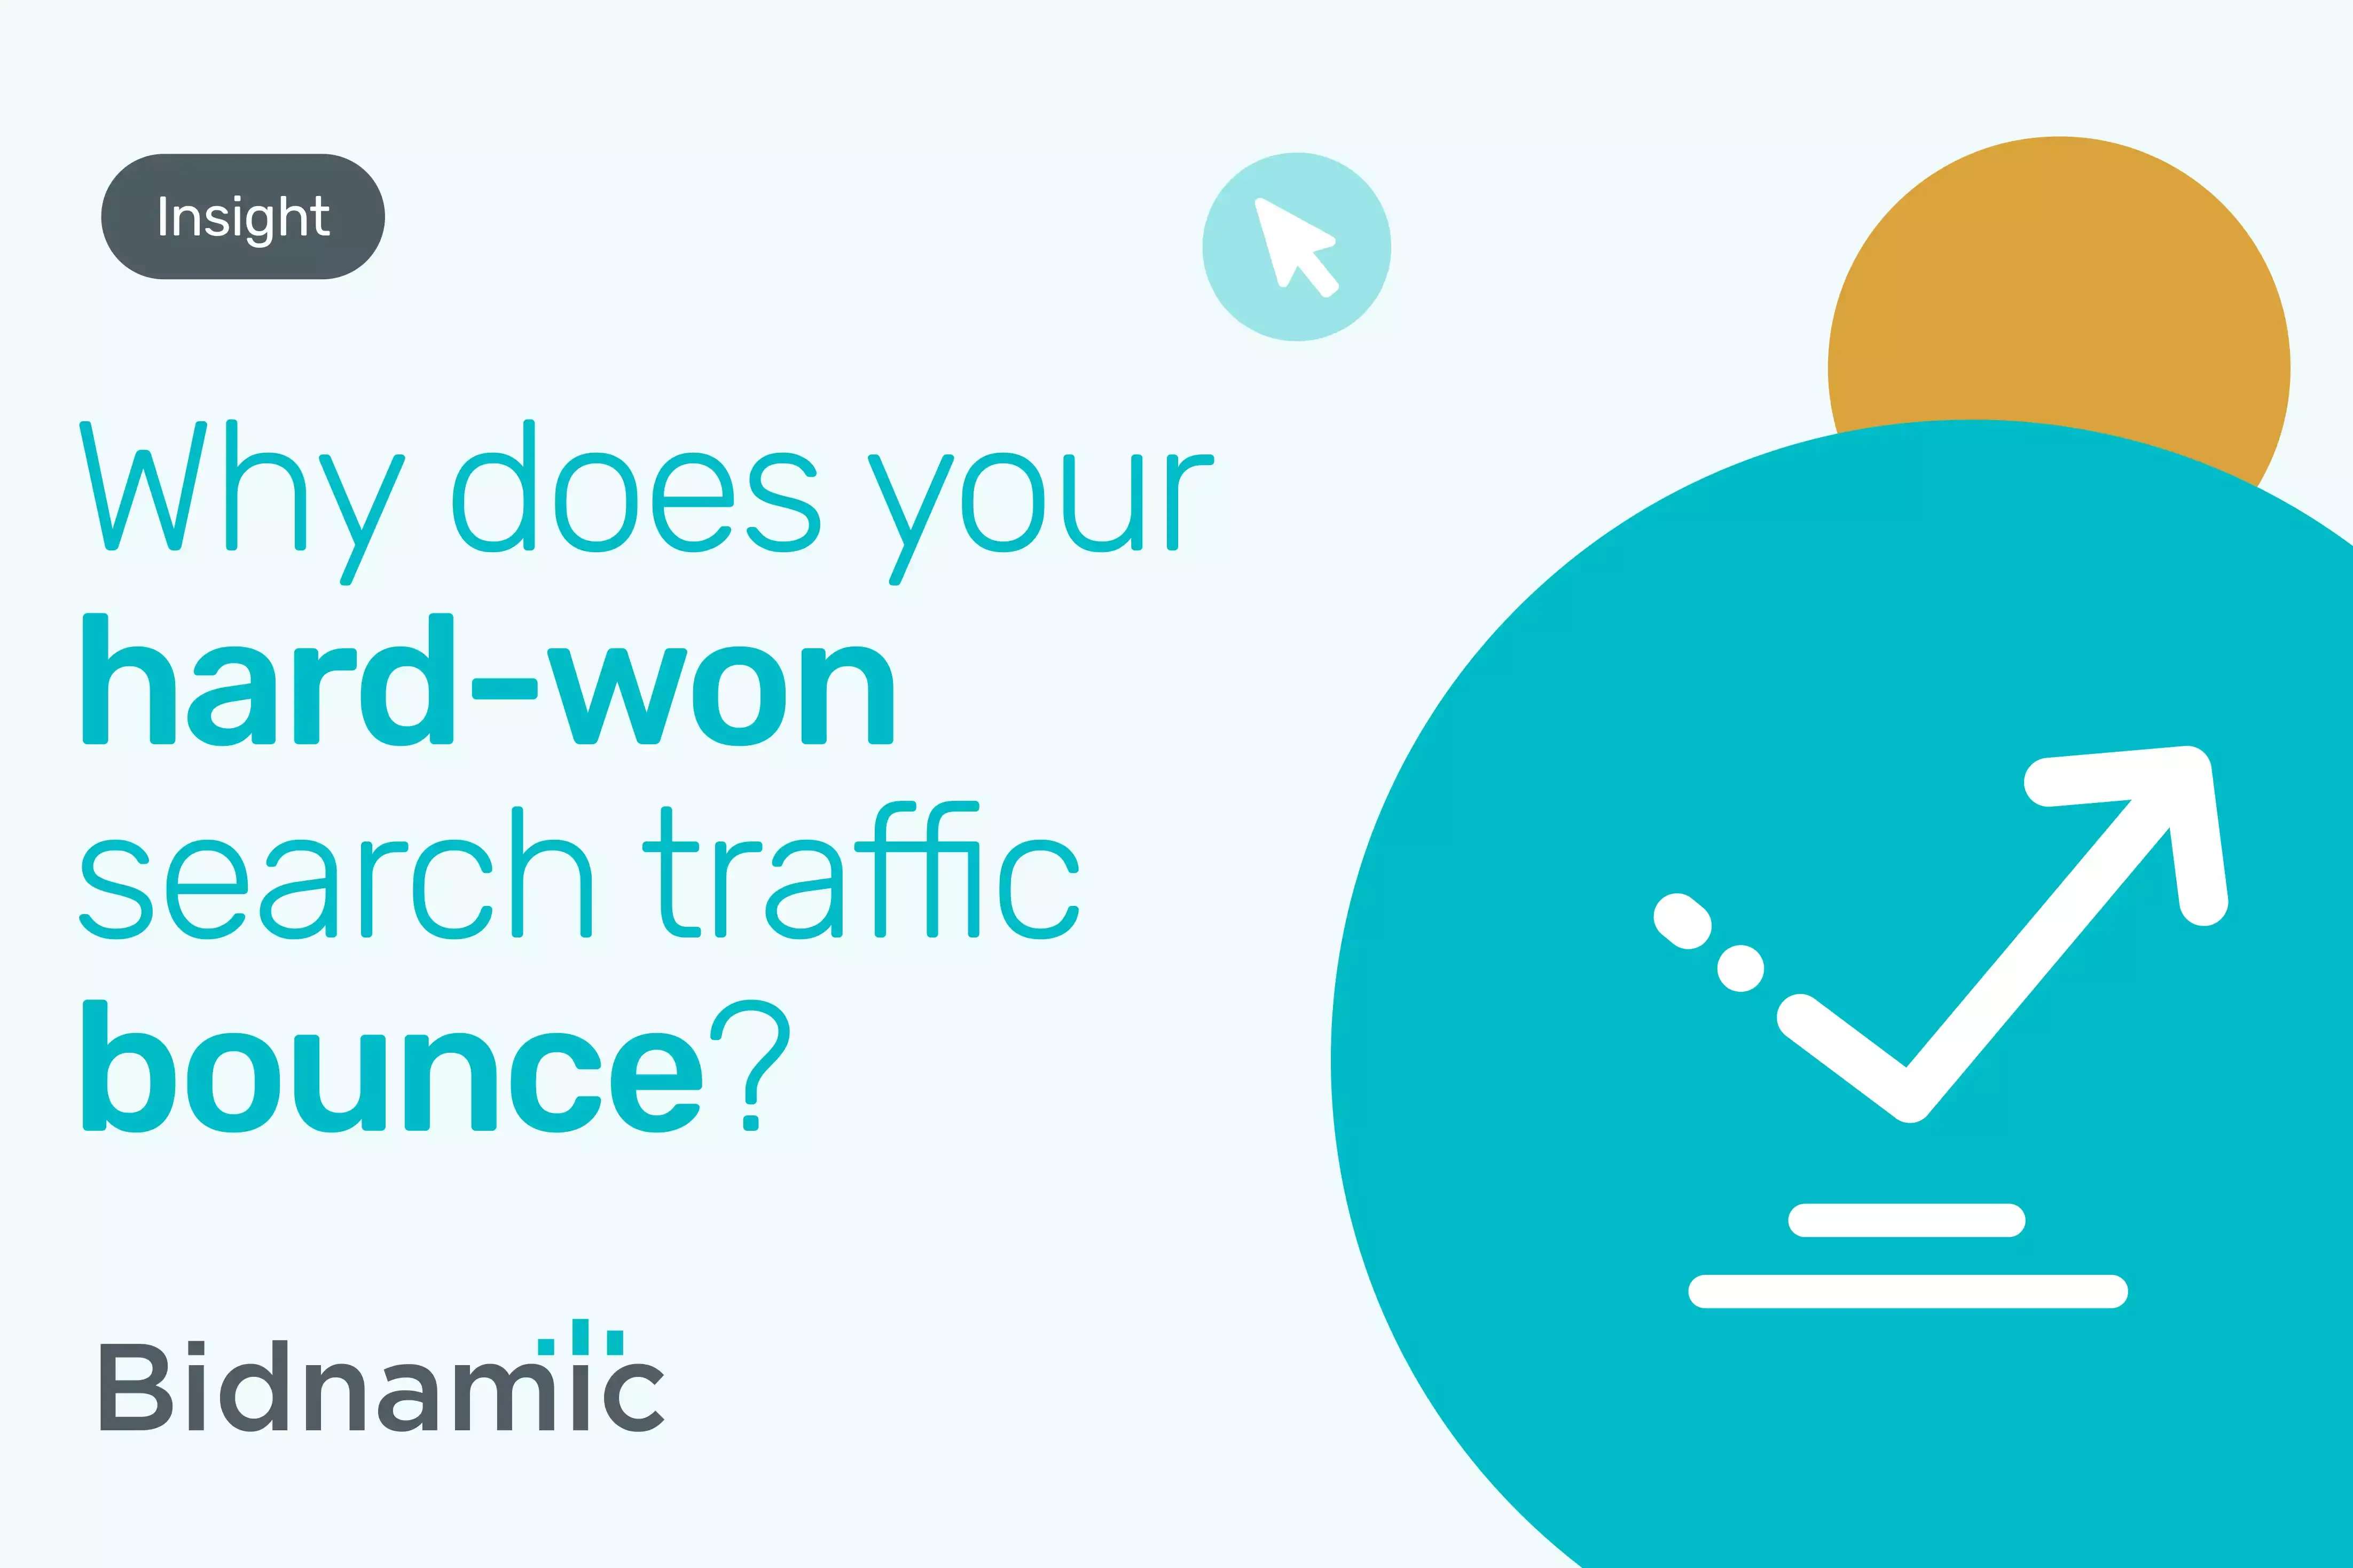 Why does your hard-won search traffic bounce?